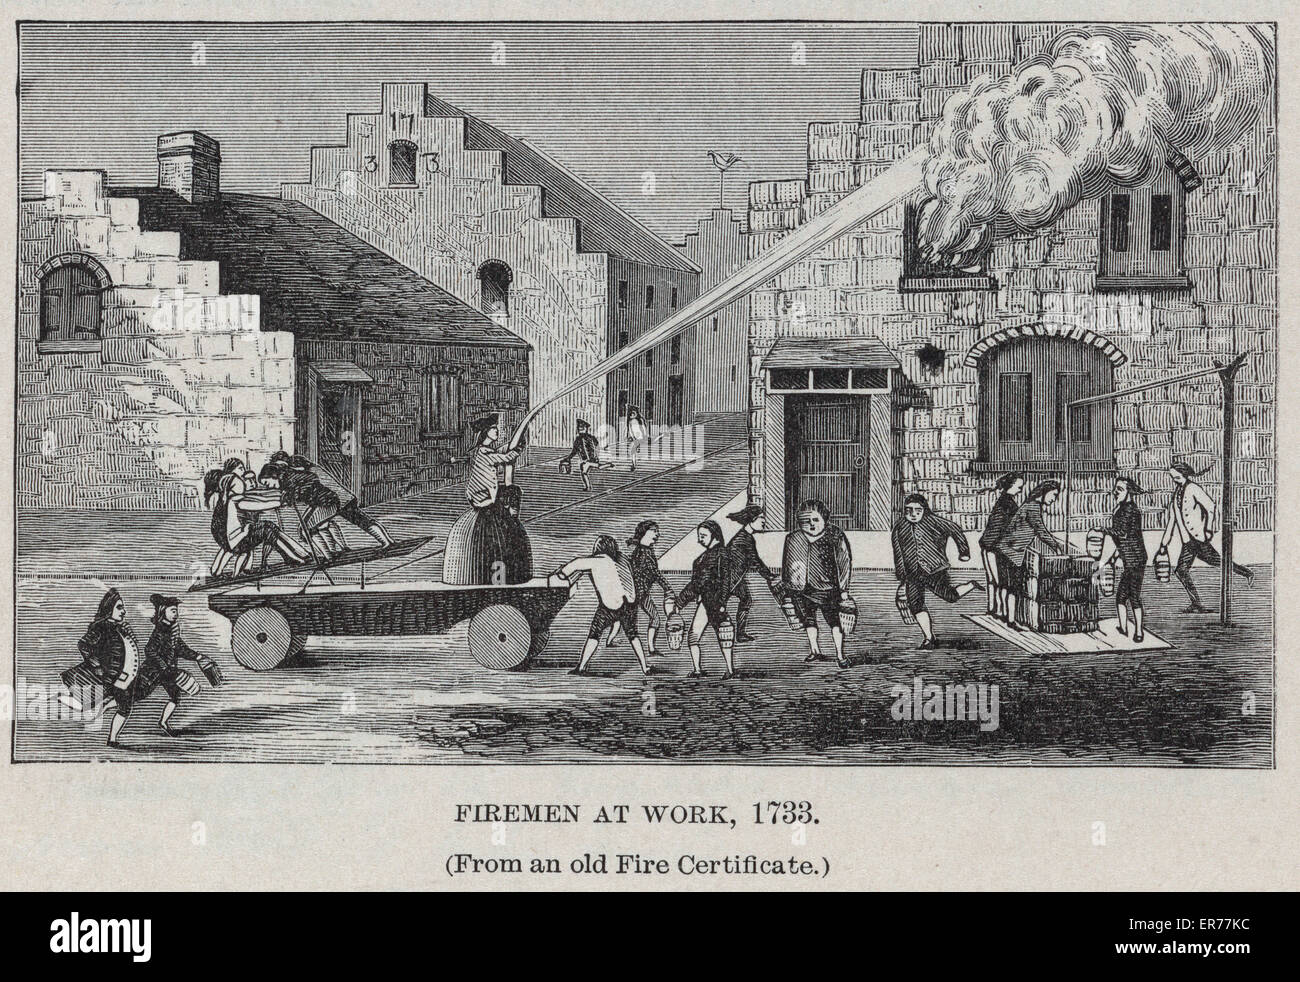 Firemen at work, 1733 (From an old Fire Certificate). Illustration showing firemen on vehicle pumping water through hose onto burning building, as other firemen bring water from well in buckets and put it into vehicle. Date c1887. Stock Photo